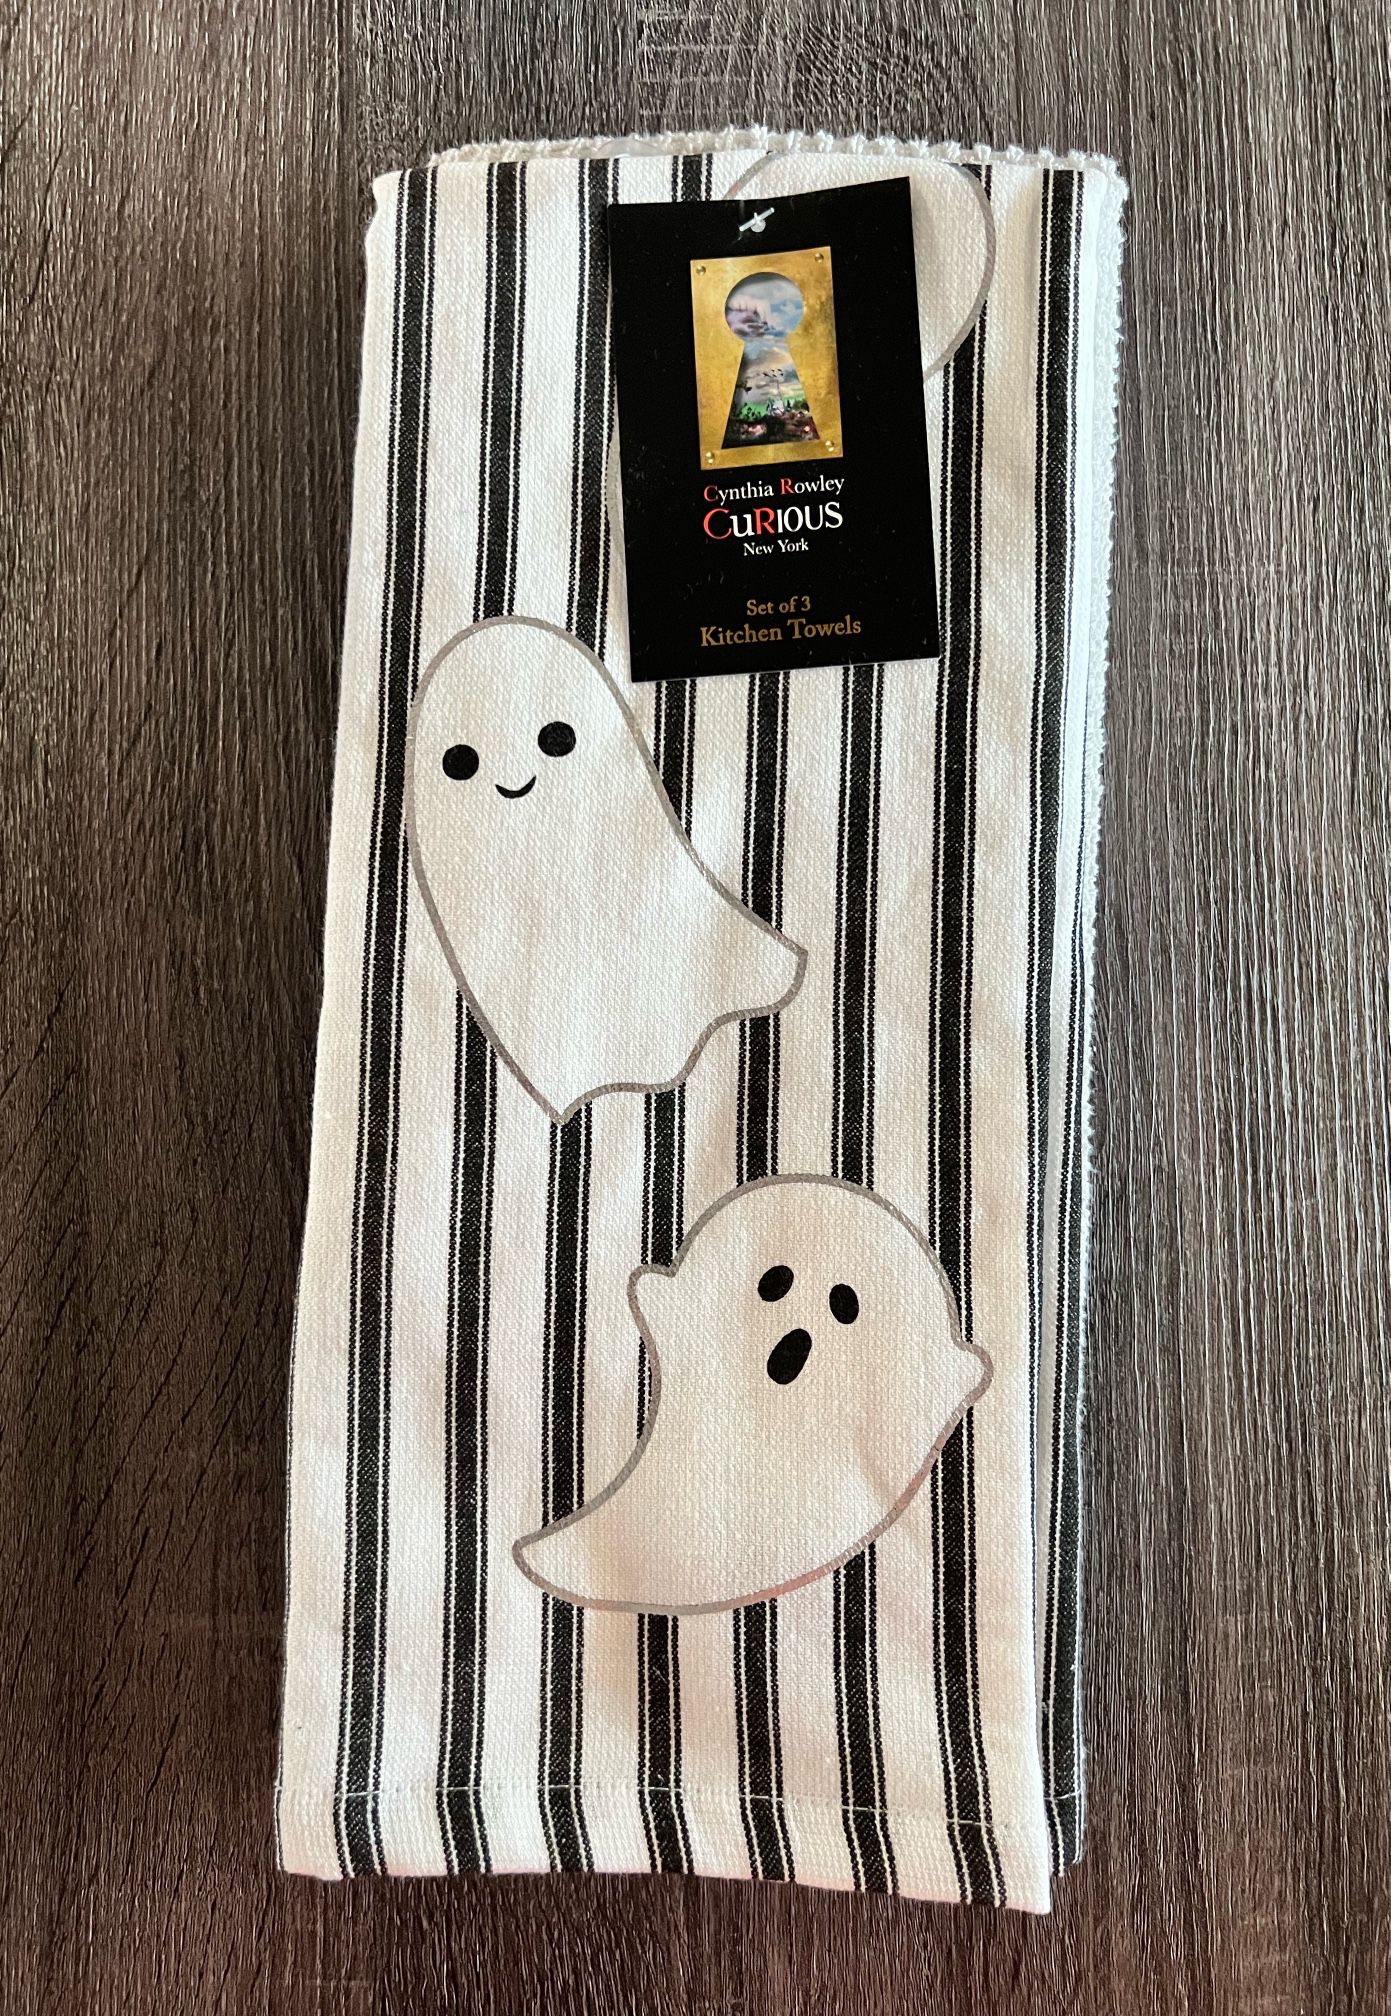 Cynthia Rowley Curious Halloween Goth Ghost Kitchen Dish Towels Gothic  Black White for Sale in Vancouver, WA - OfferUp